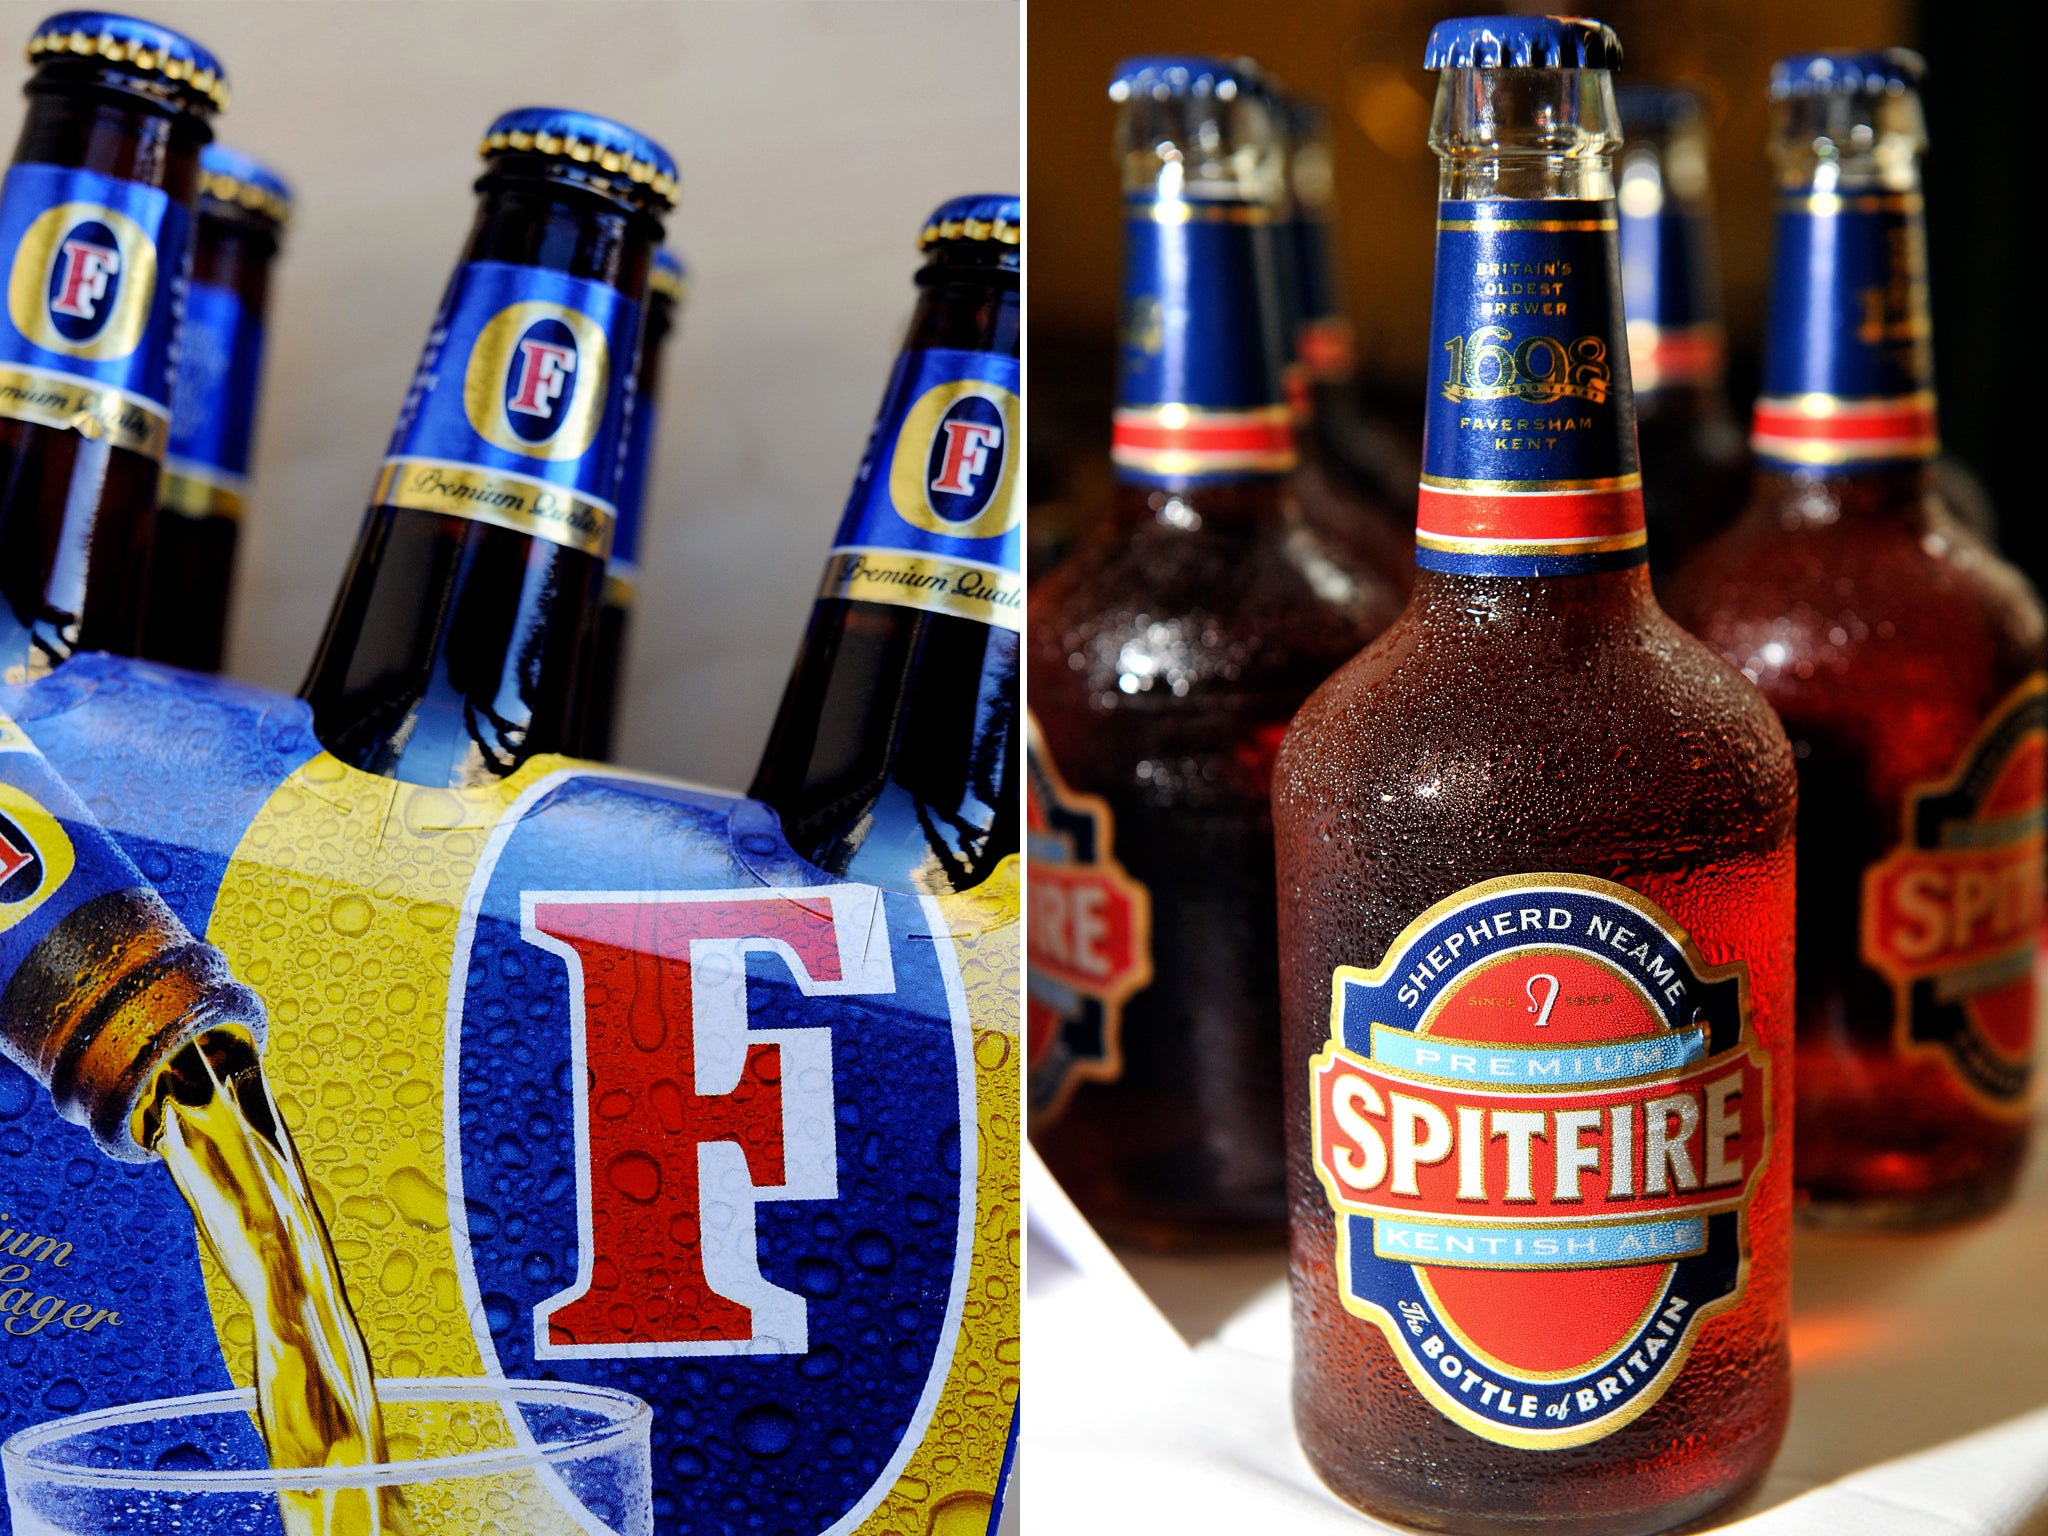 Foster’s and Spitfire ale are among the beers that have seen their alcohol content lowered as part of ‘drinkflation'